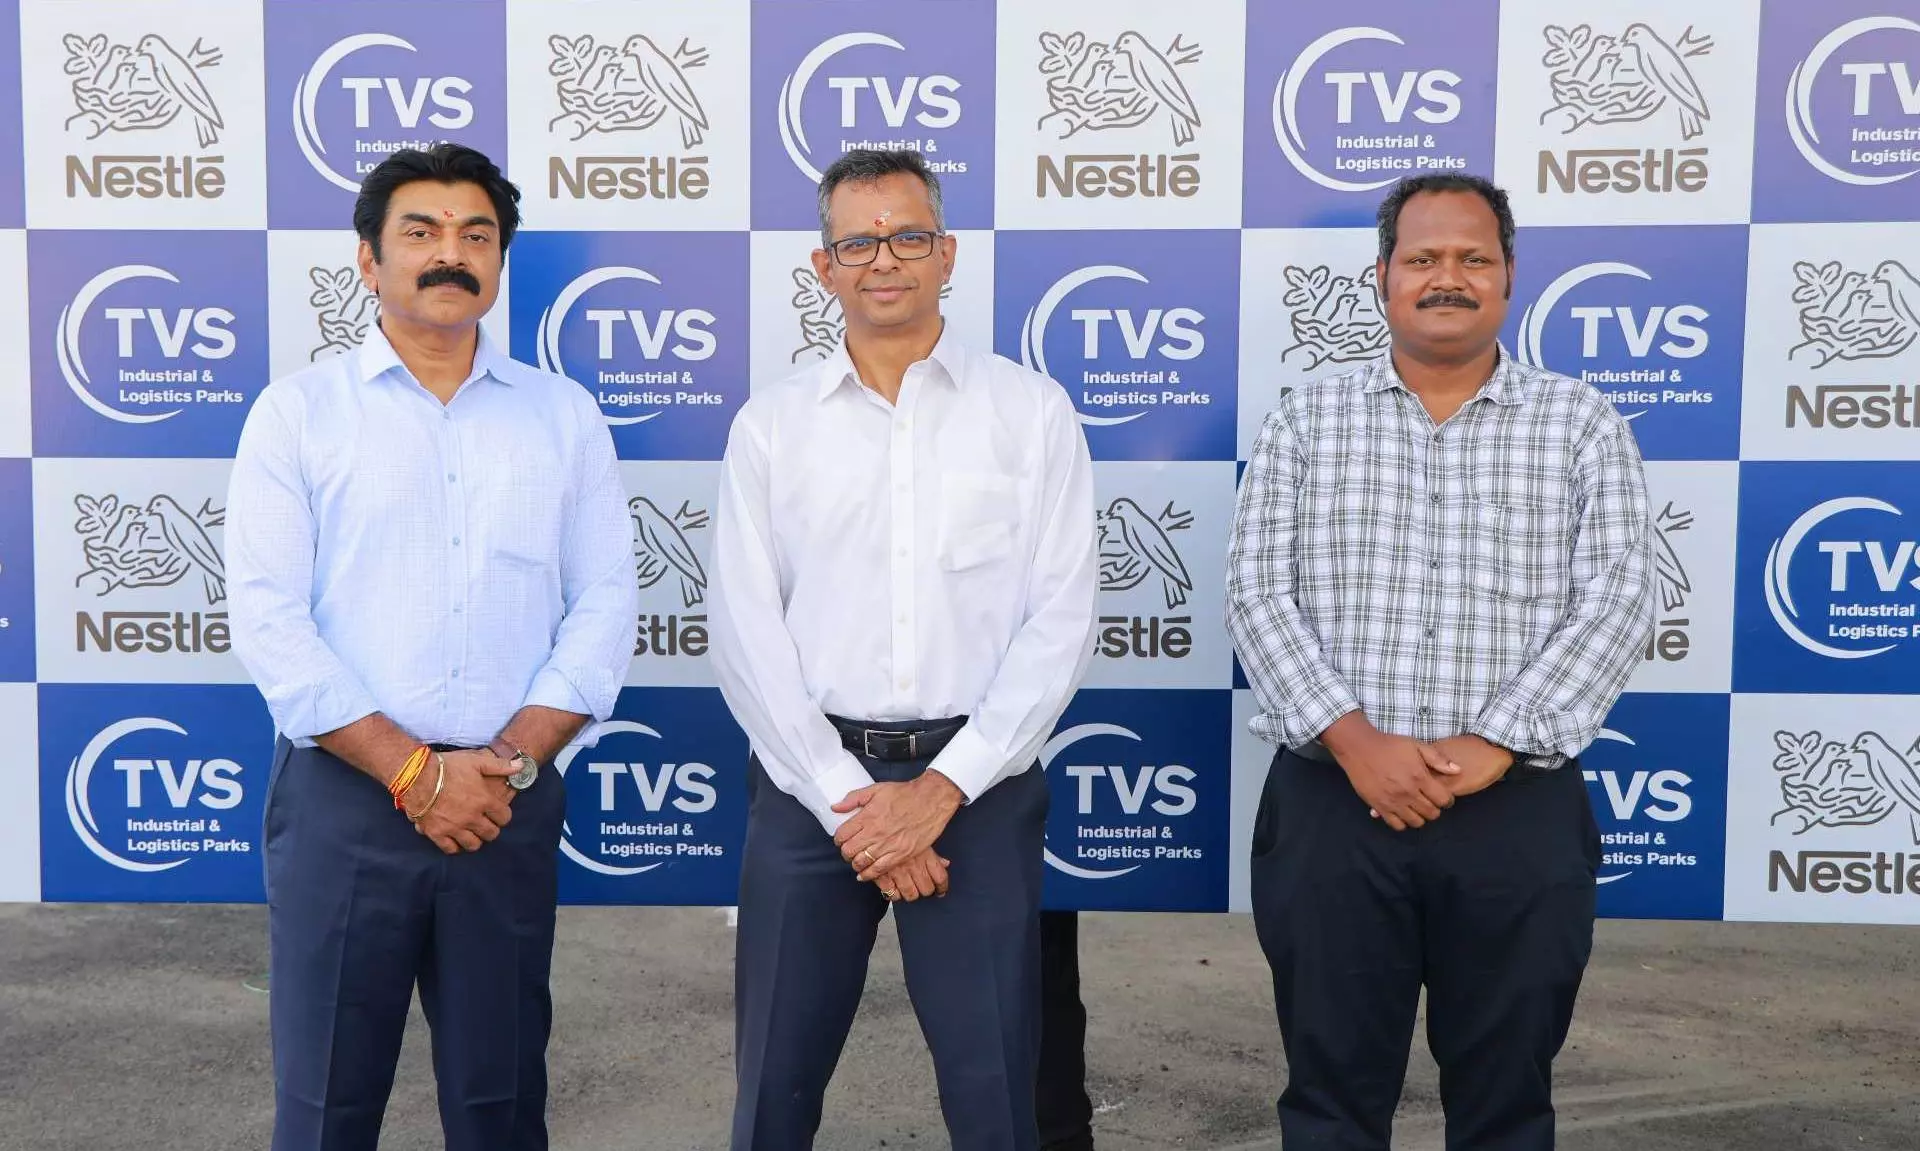 TVS ILP offers tailored warehouse solutions for Nestlé in Coimbatore